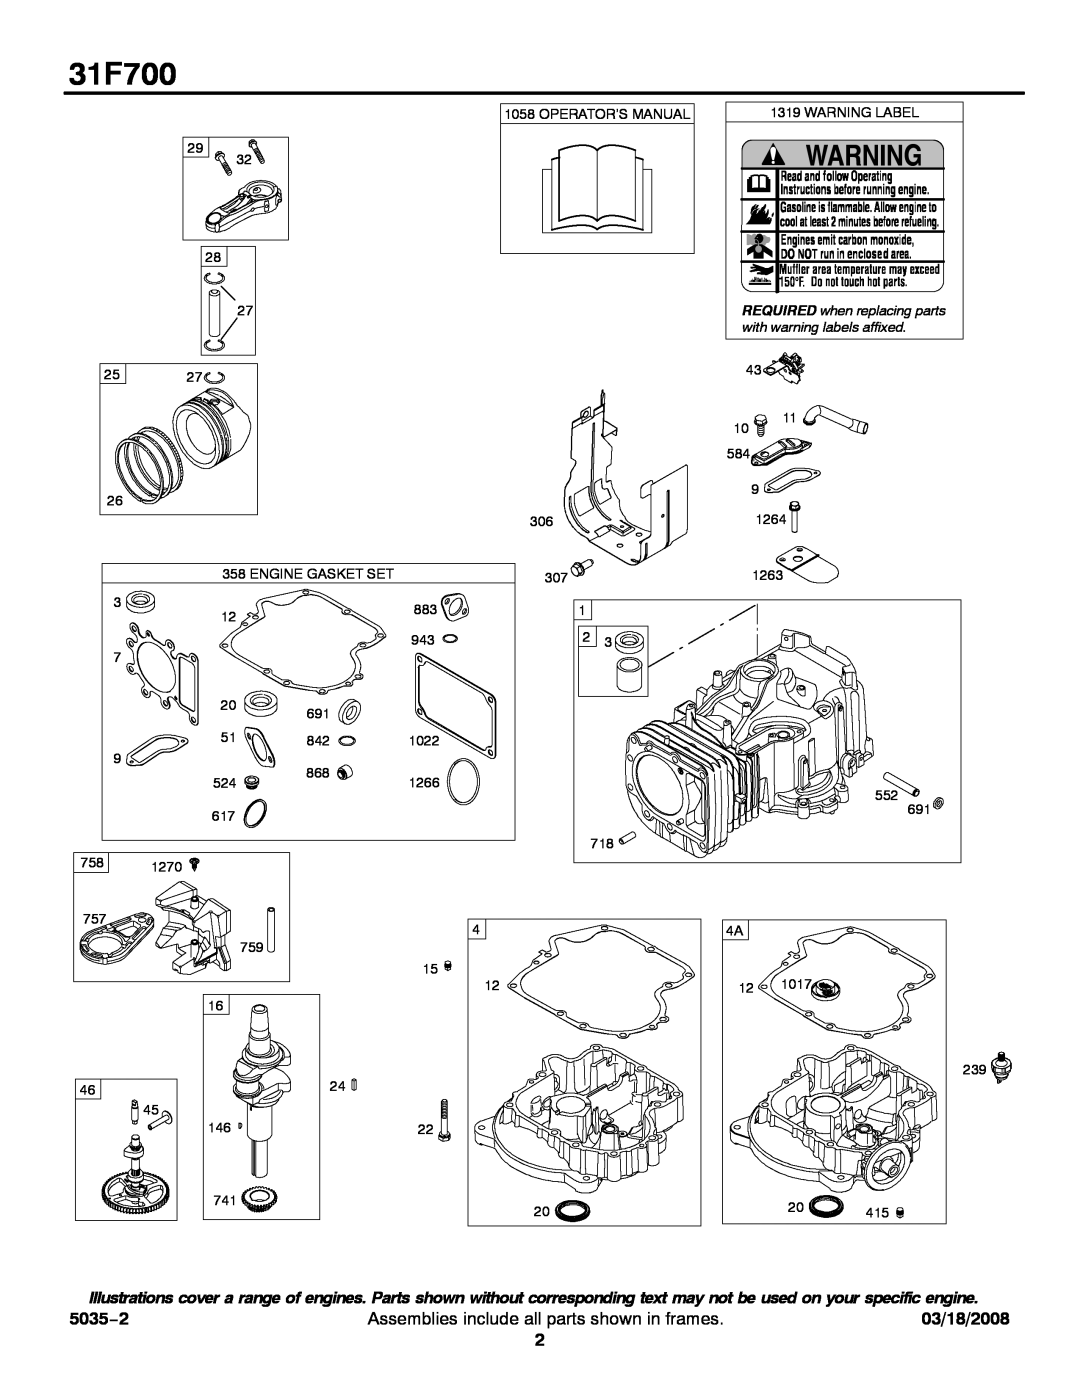 Briggs & Stratton 31F700 Series service manual 5035−2, Assemblies include all parts shown in frames, 03/18/2008 